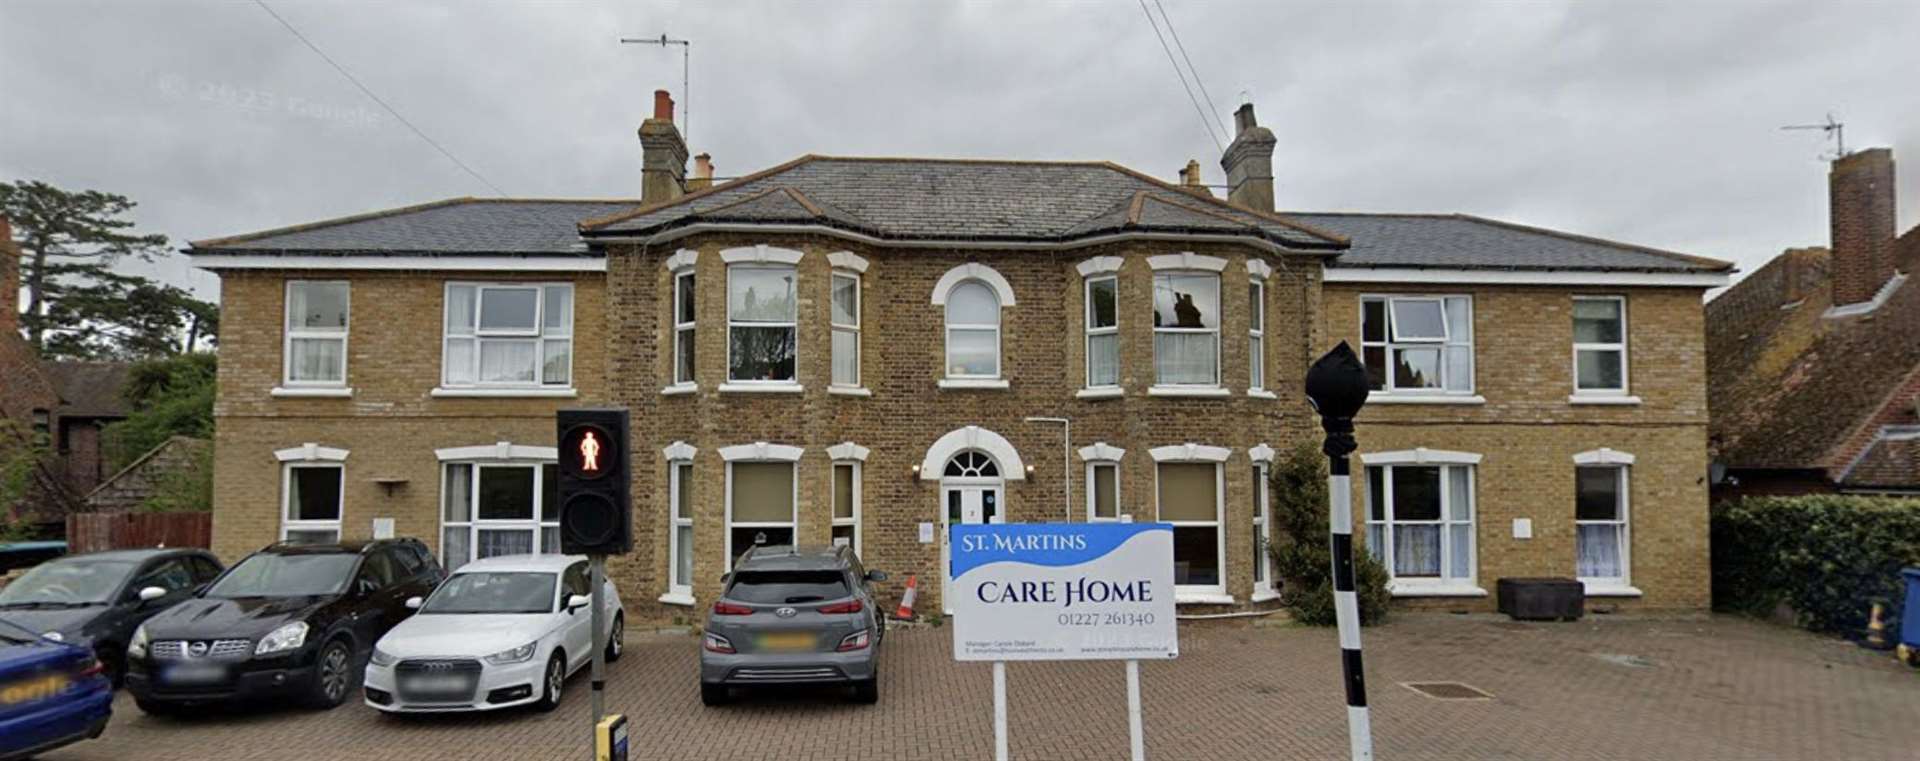 A CQC inspection found multiple failings at St Martins care home in Whitstable. Picture: Google